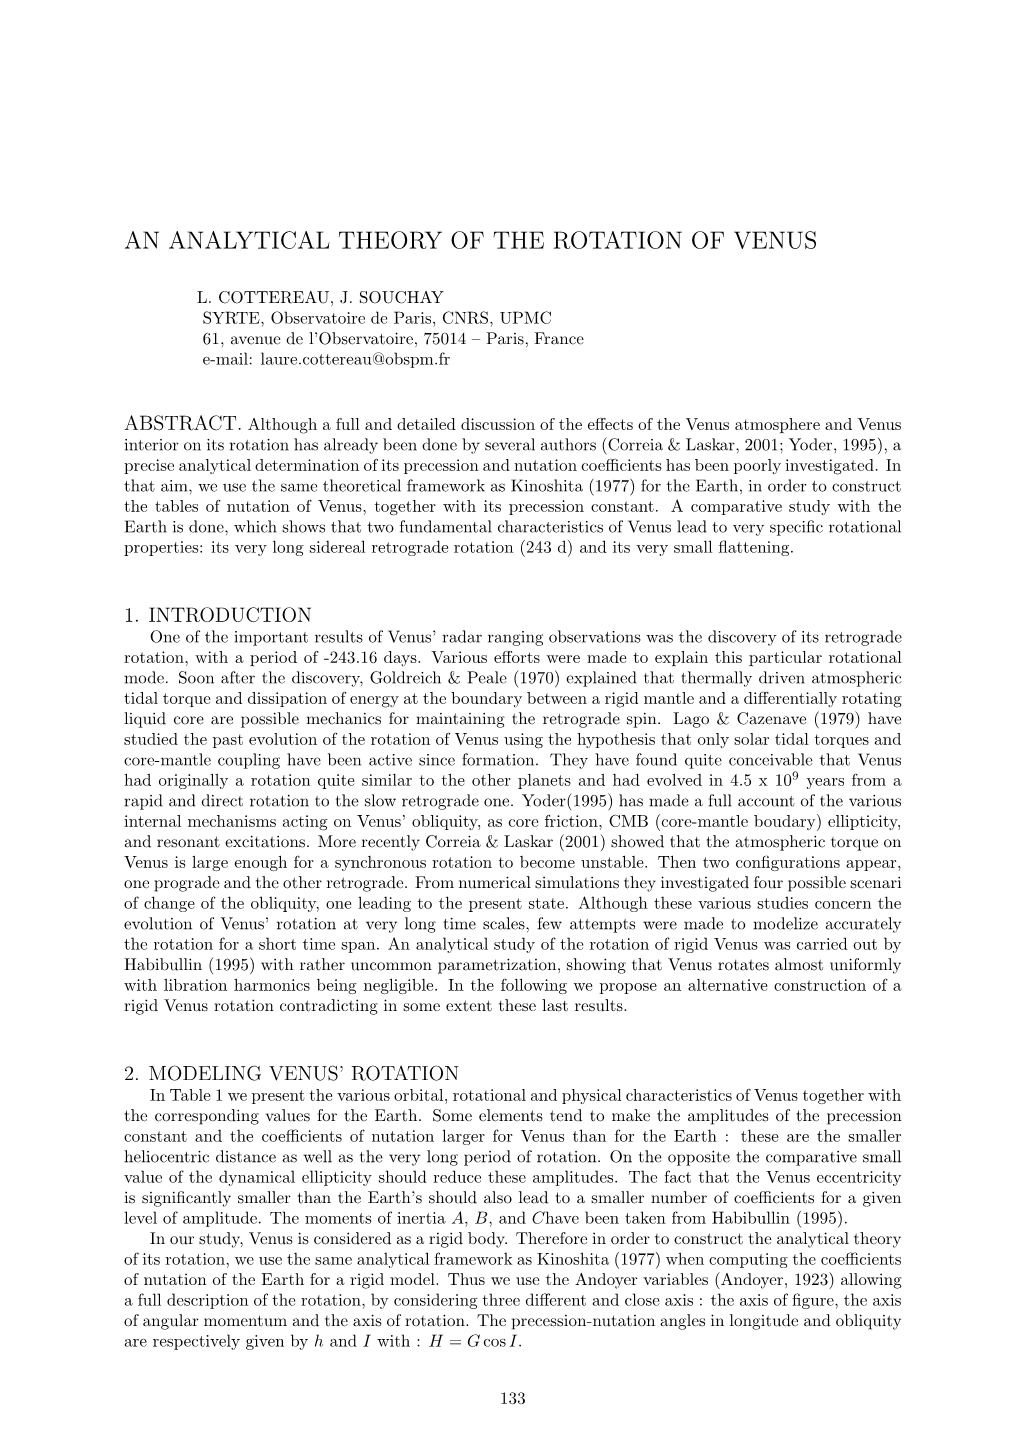 An Analytical Theory of the Rotation of Venus